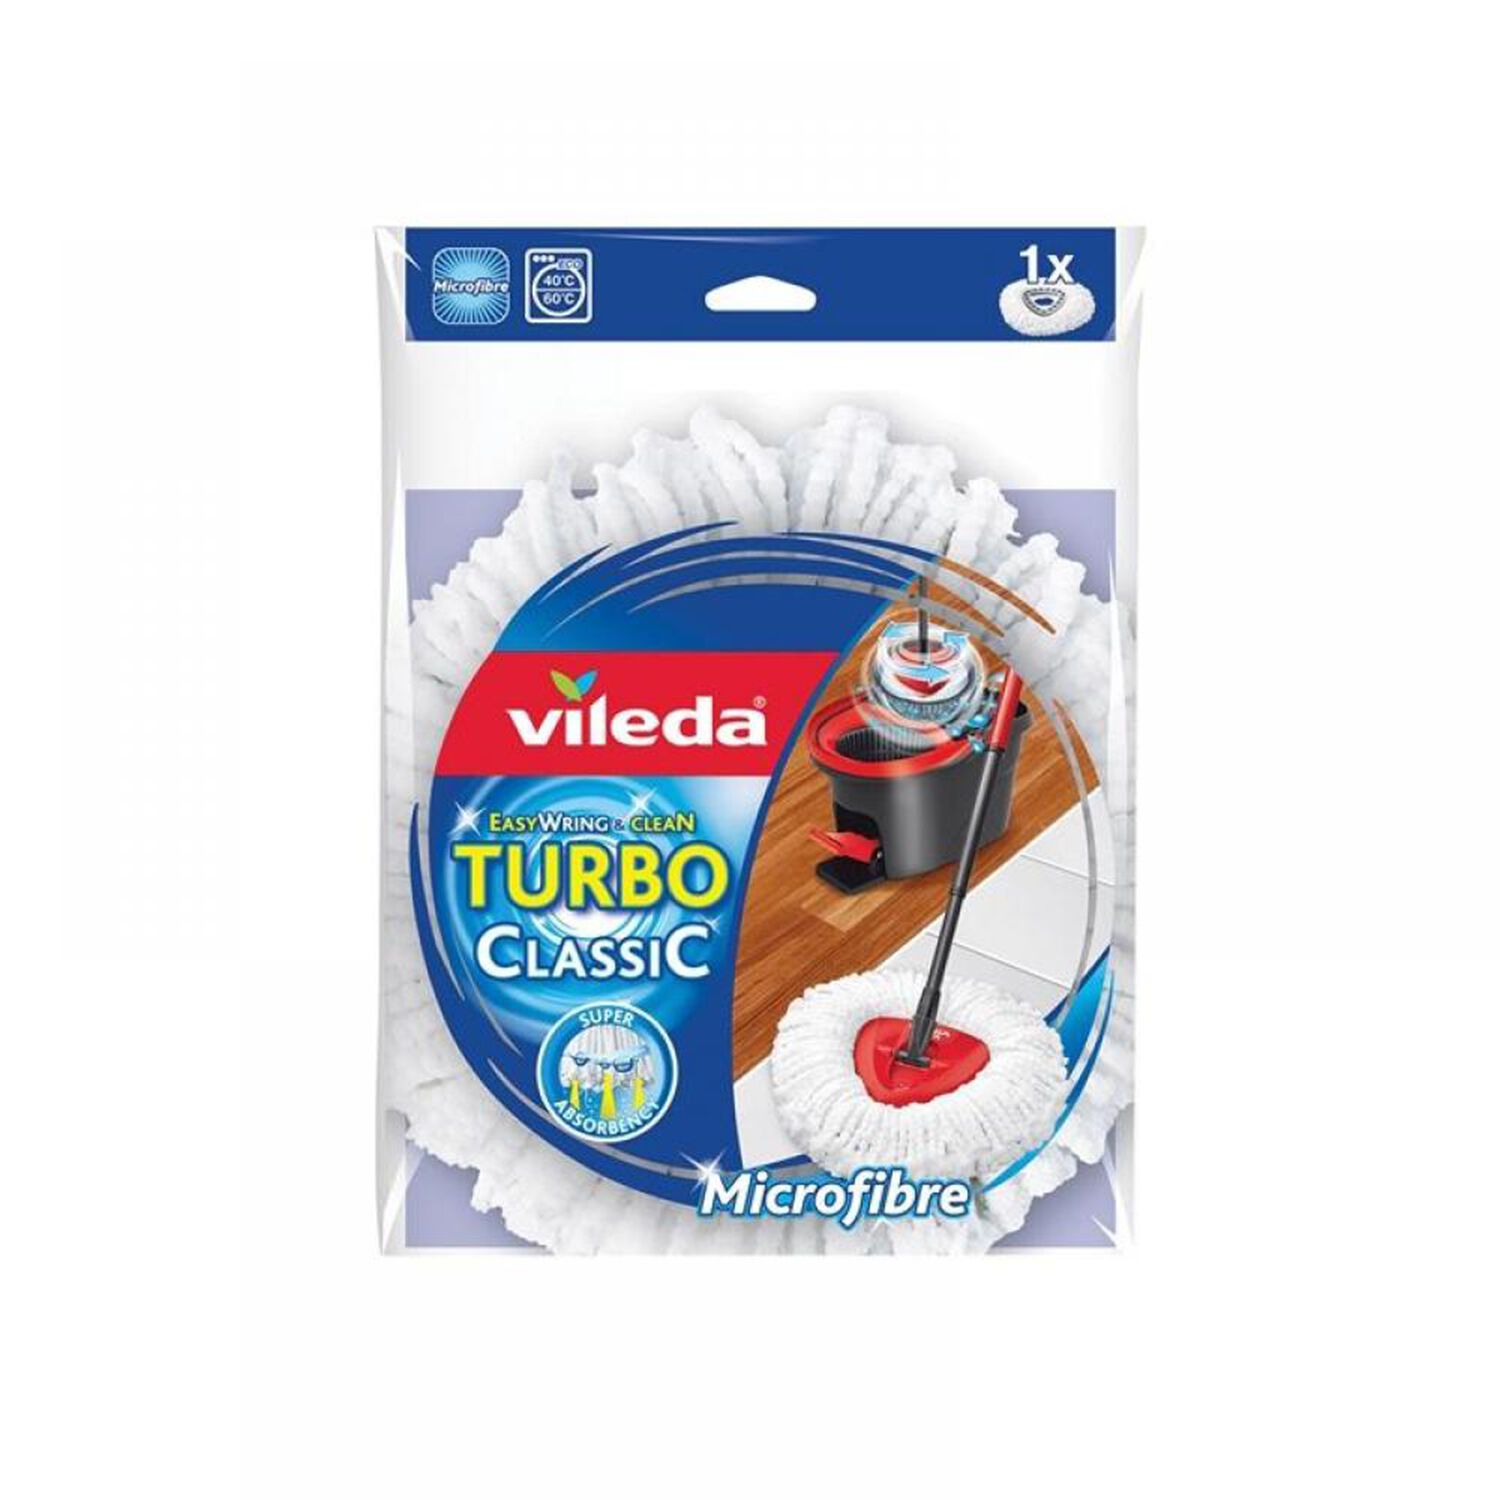  Vileda EasyWring and Clean Turbo Classic Microfibre Mop Refill  Head, Pack of 2 : Health & Household